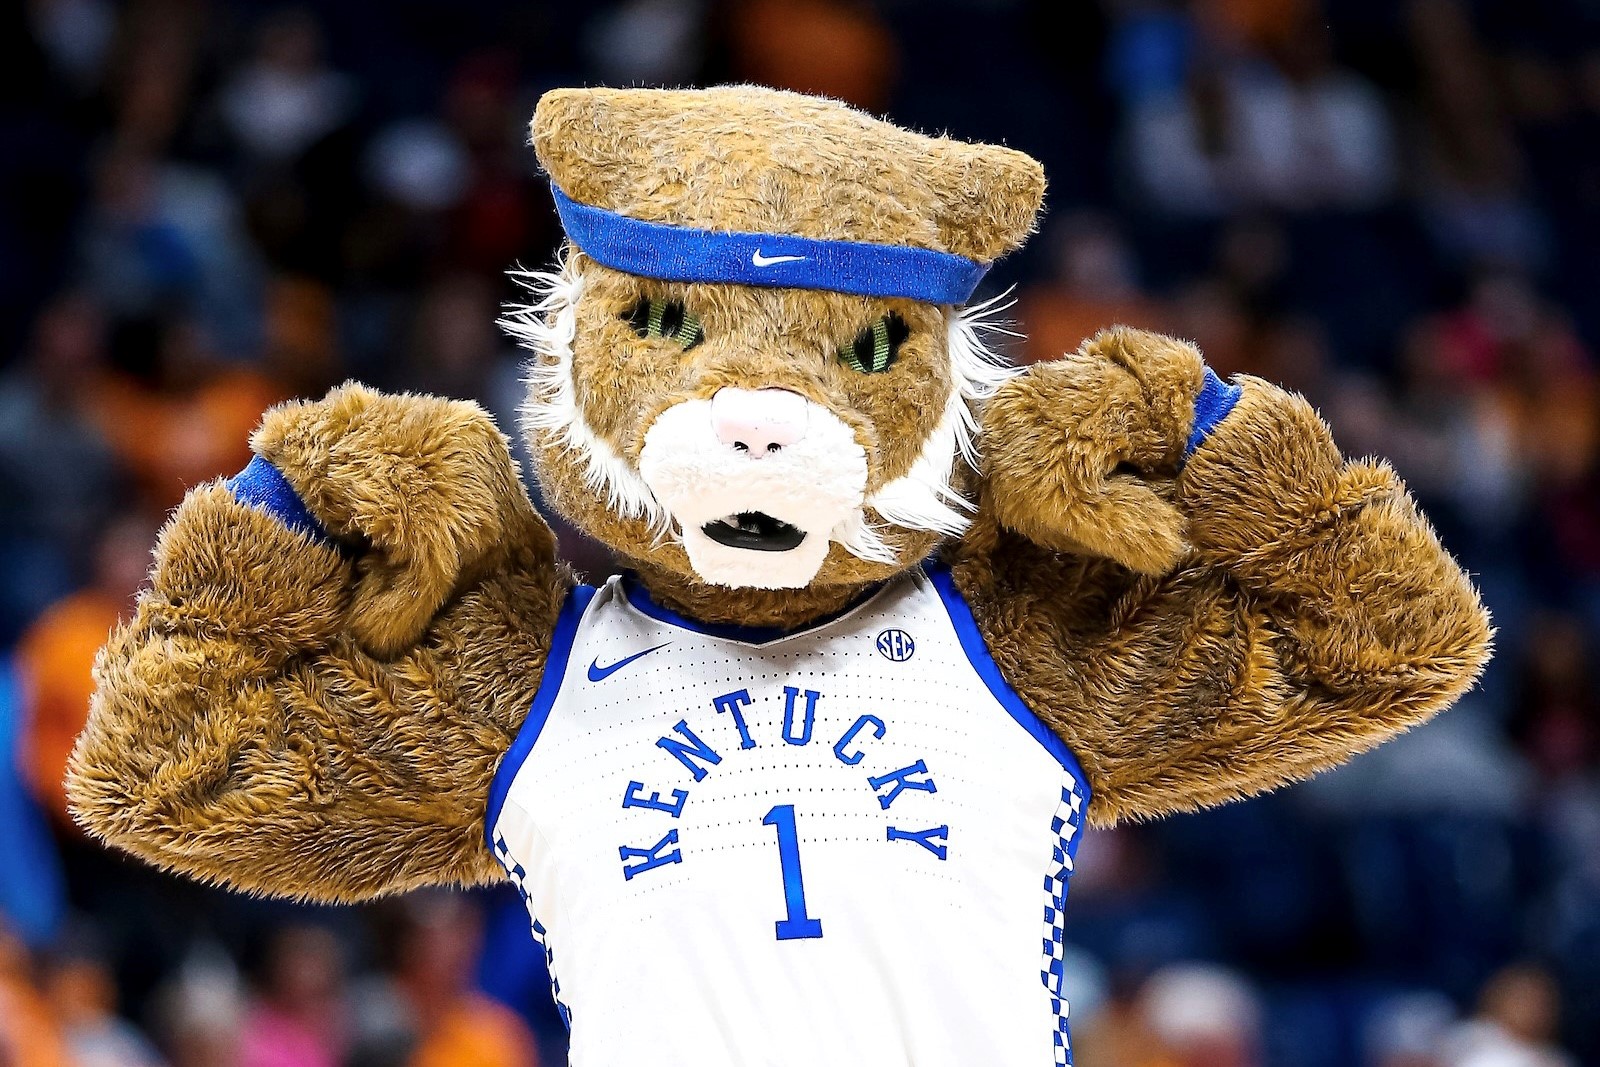 a photograph of the UK mascot posing